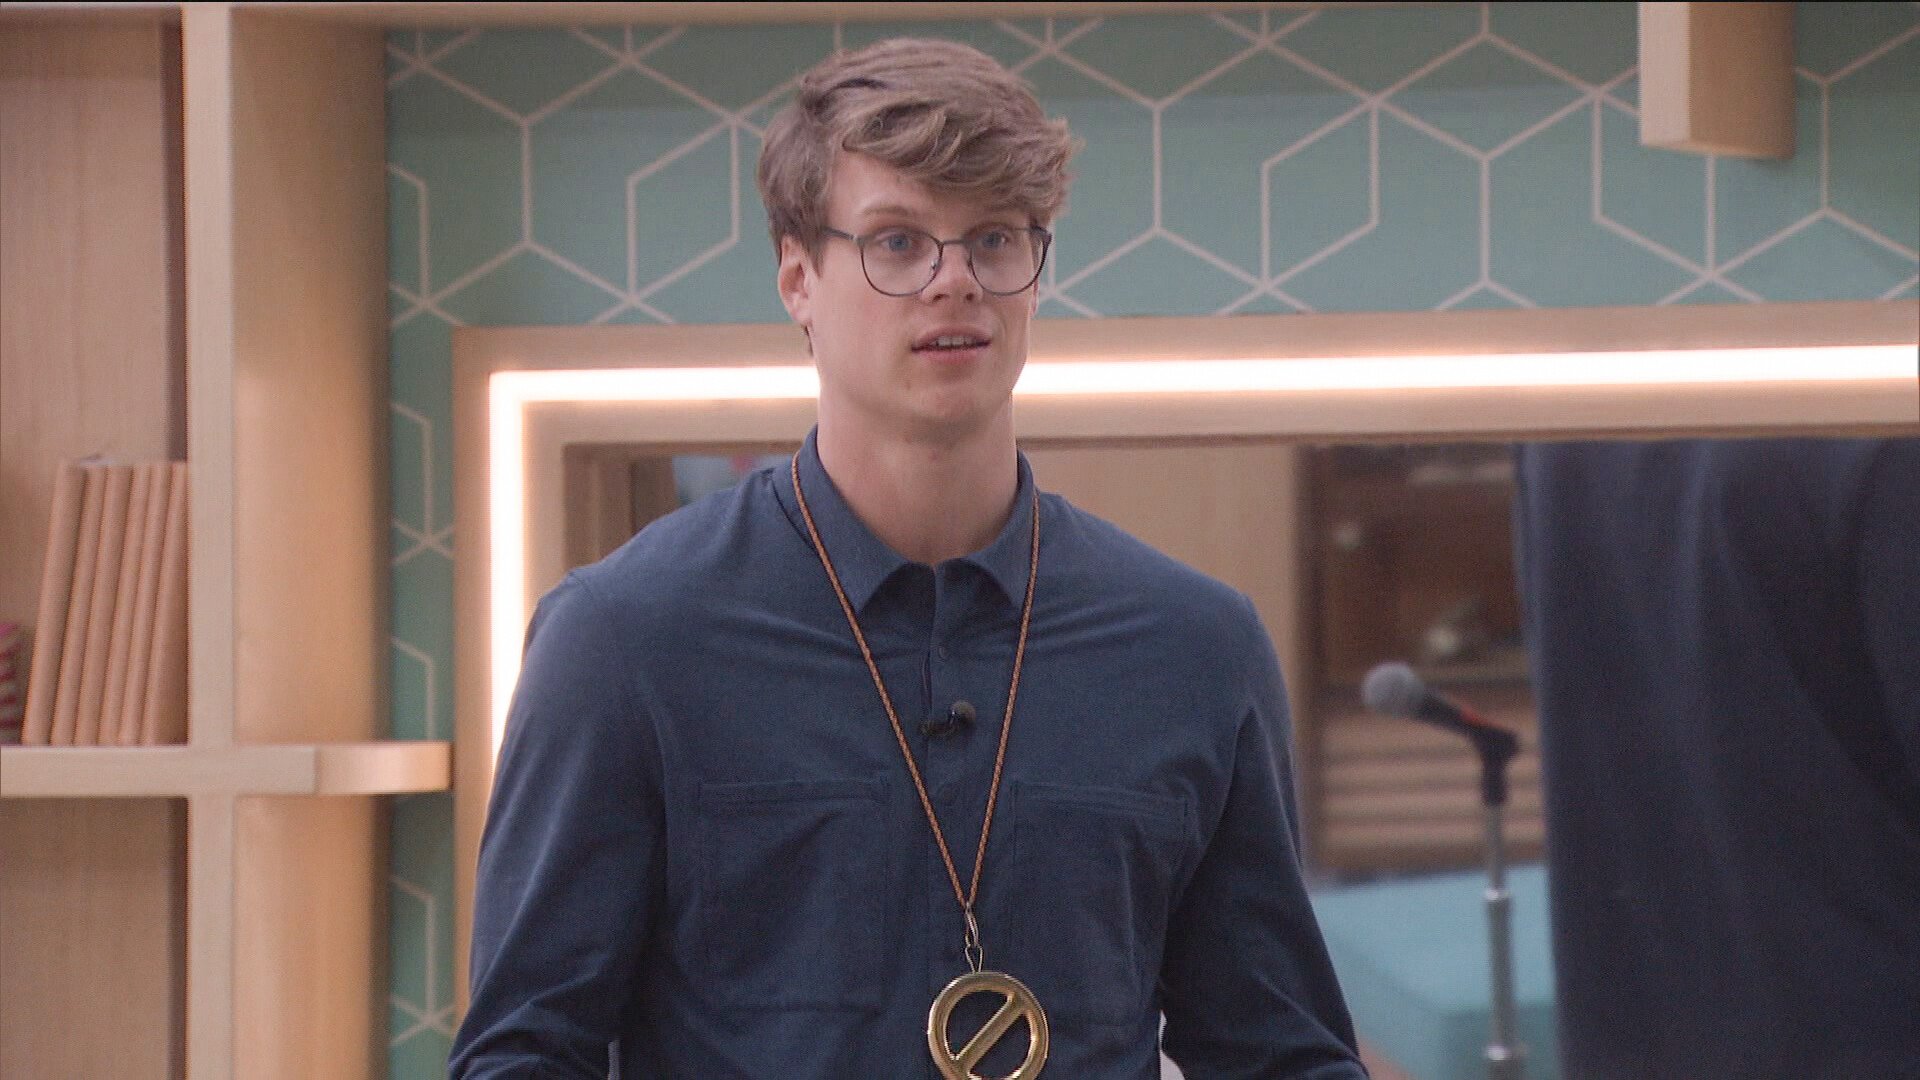 Kyle Capener wearing the Power of Veto medallion during 'Big Brother 24'